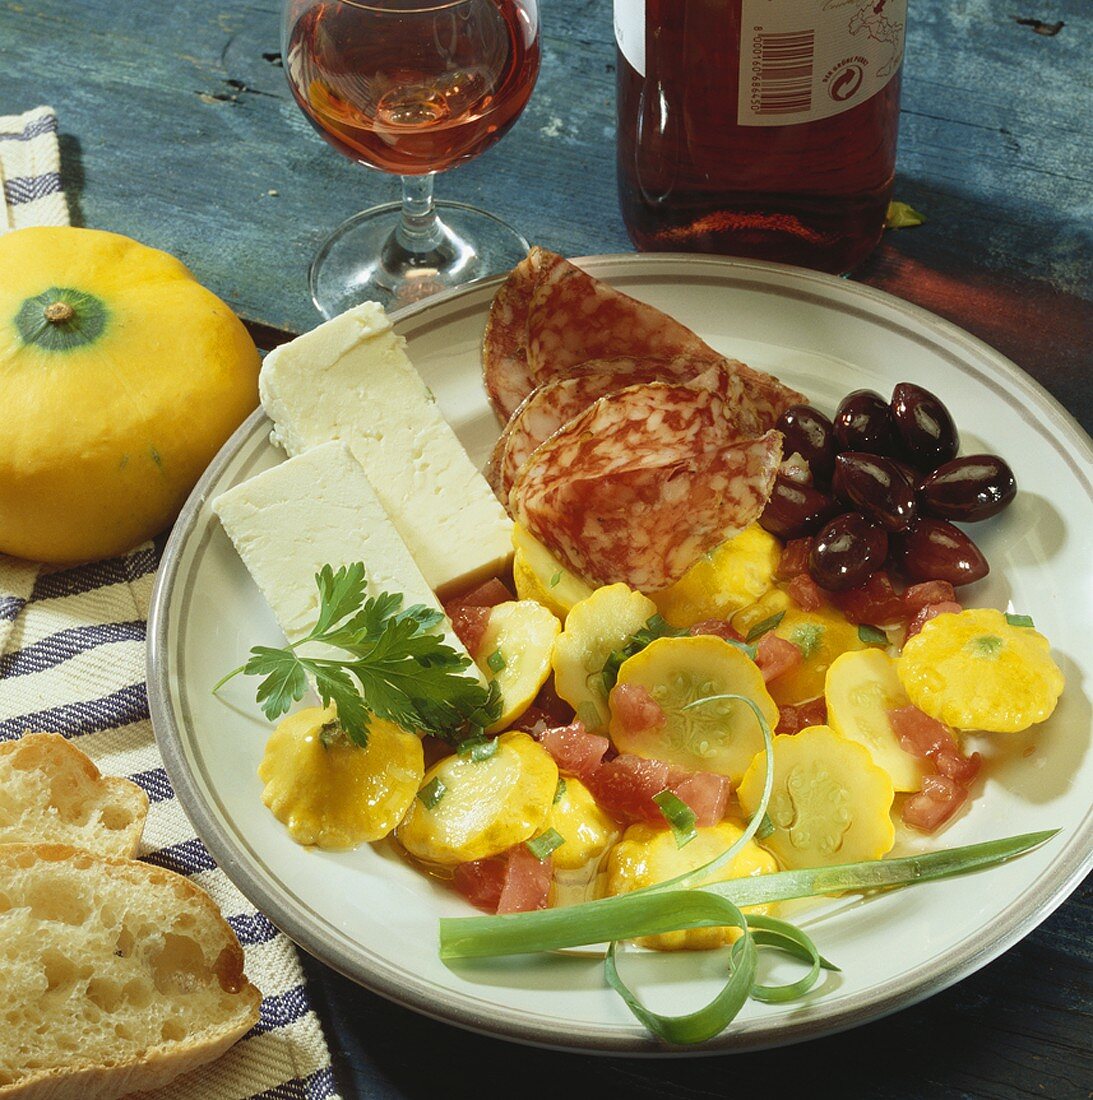 Plate of appetisers: patty pan squash, sheep's cheese, salami